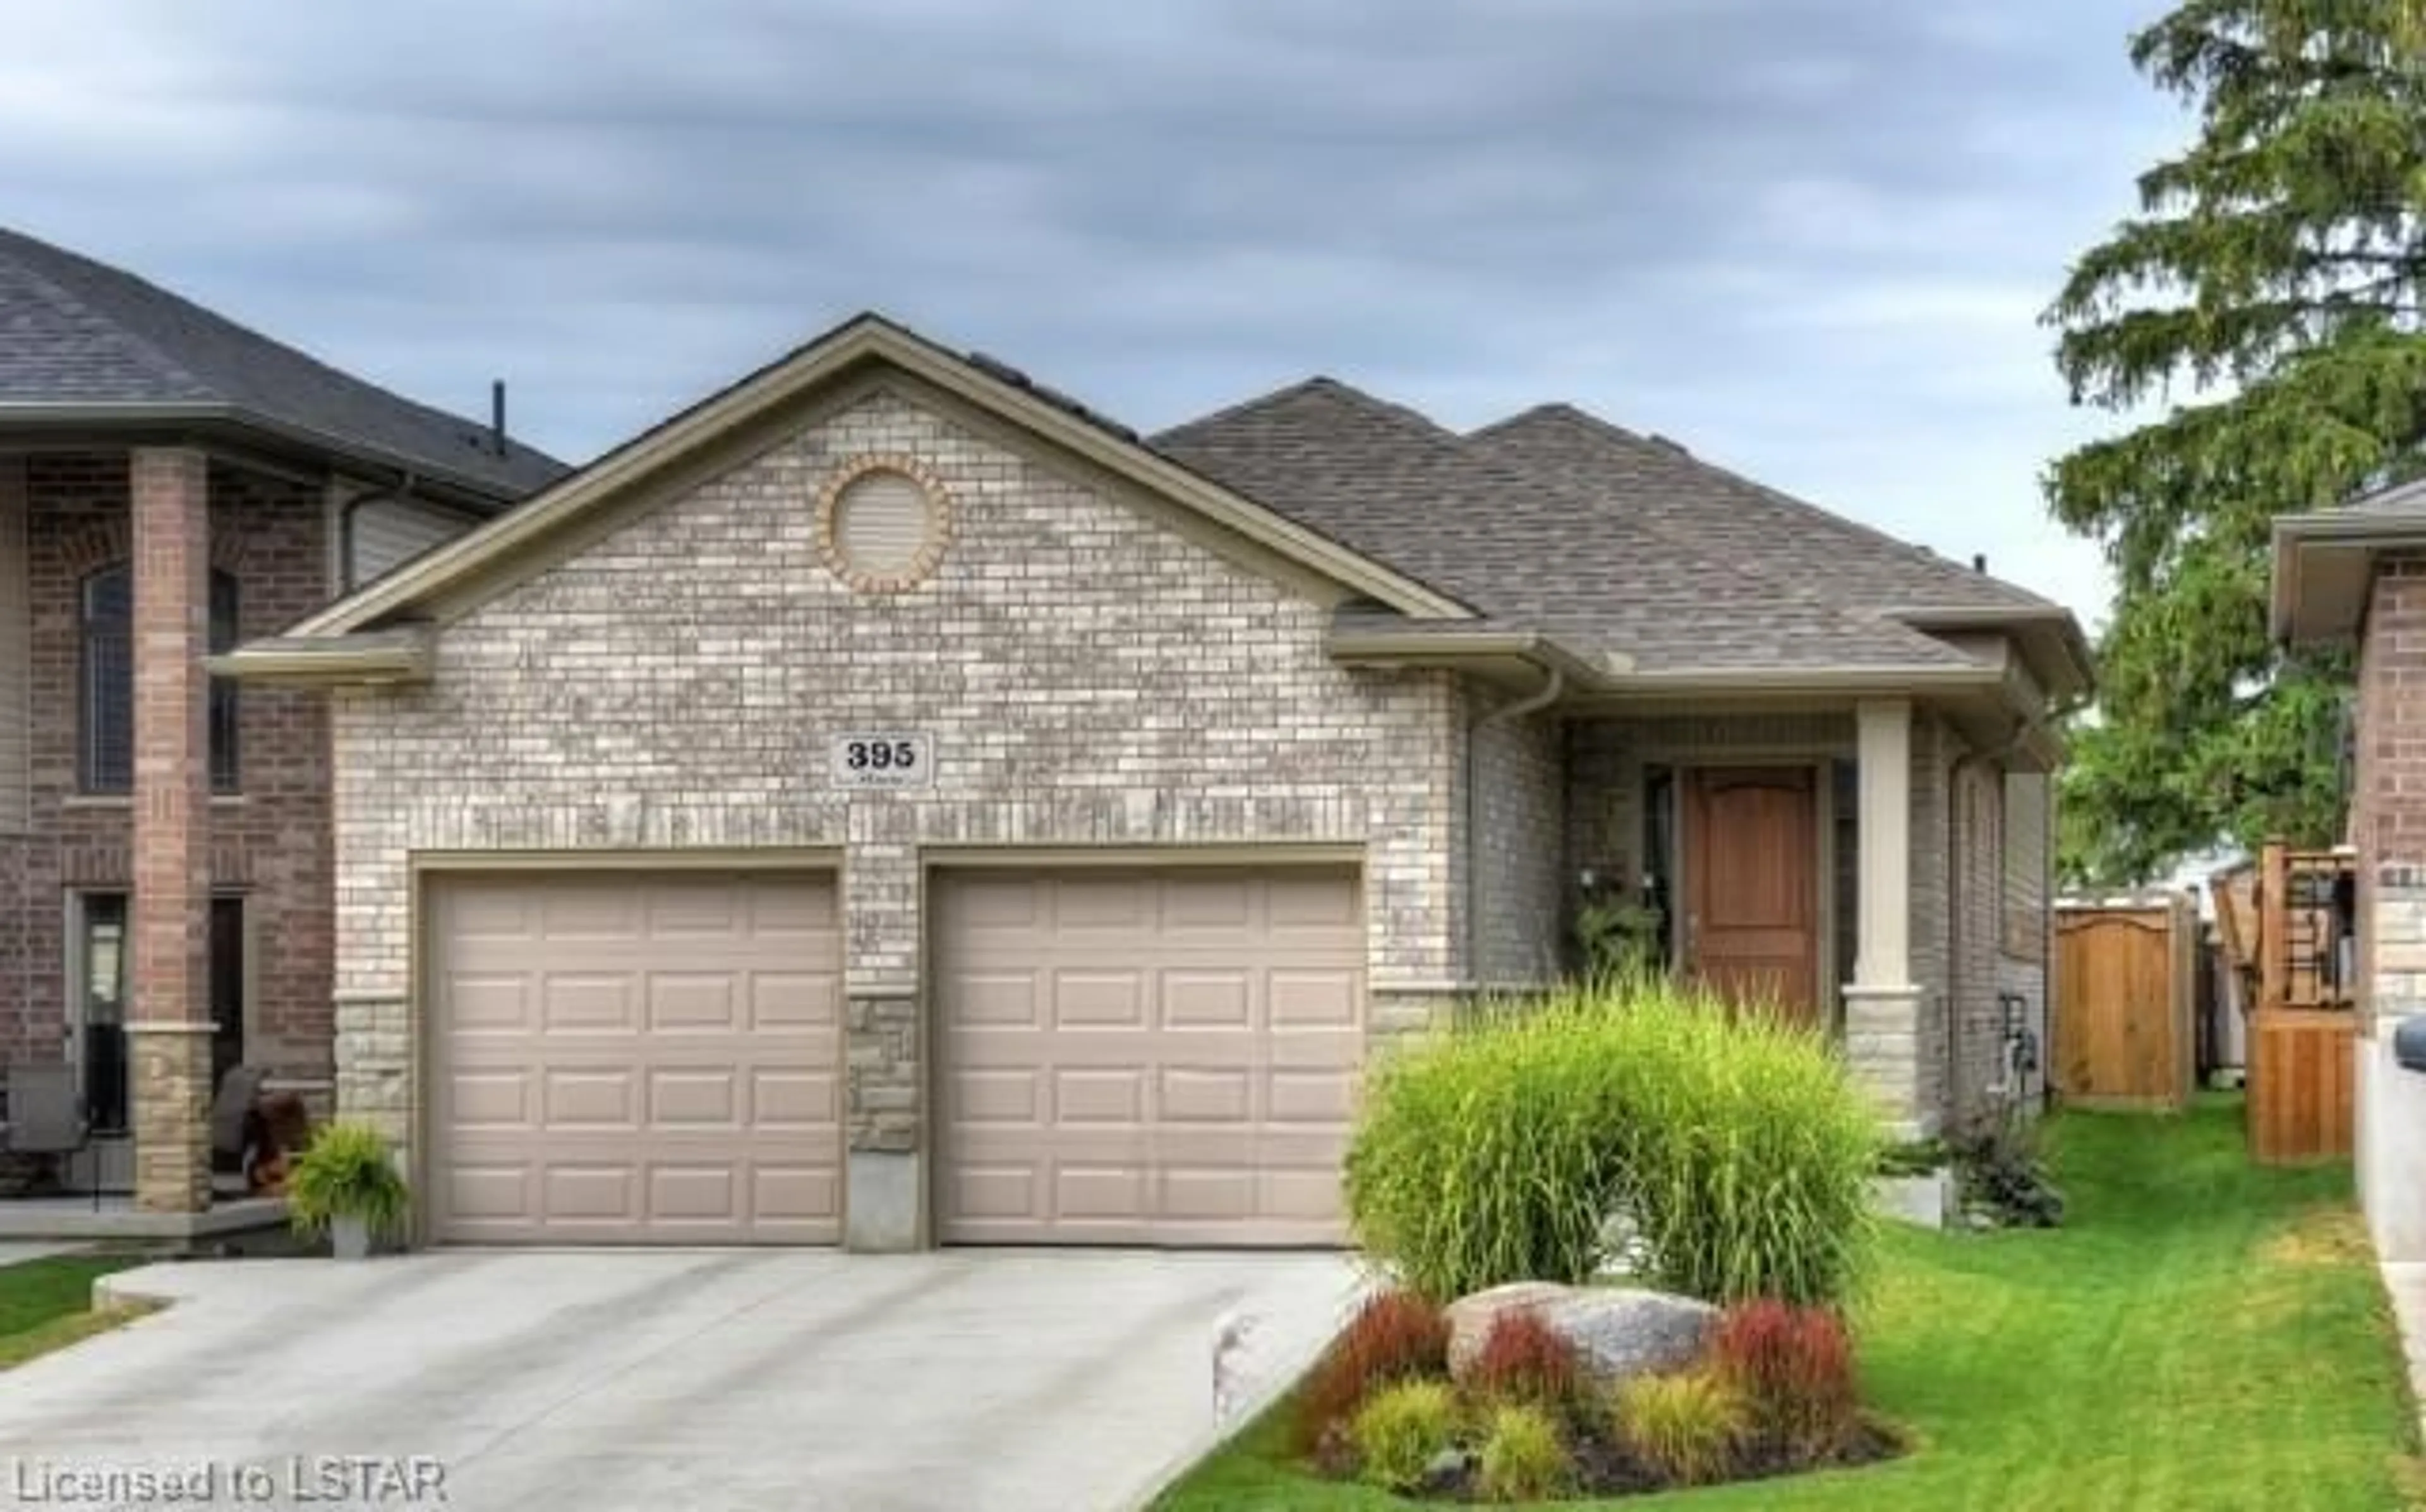 Home with brick exterior material for 395 Bourdeau Rd, London Ontario N5W 0A1